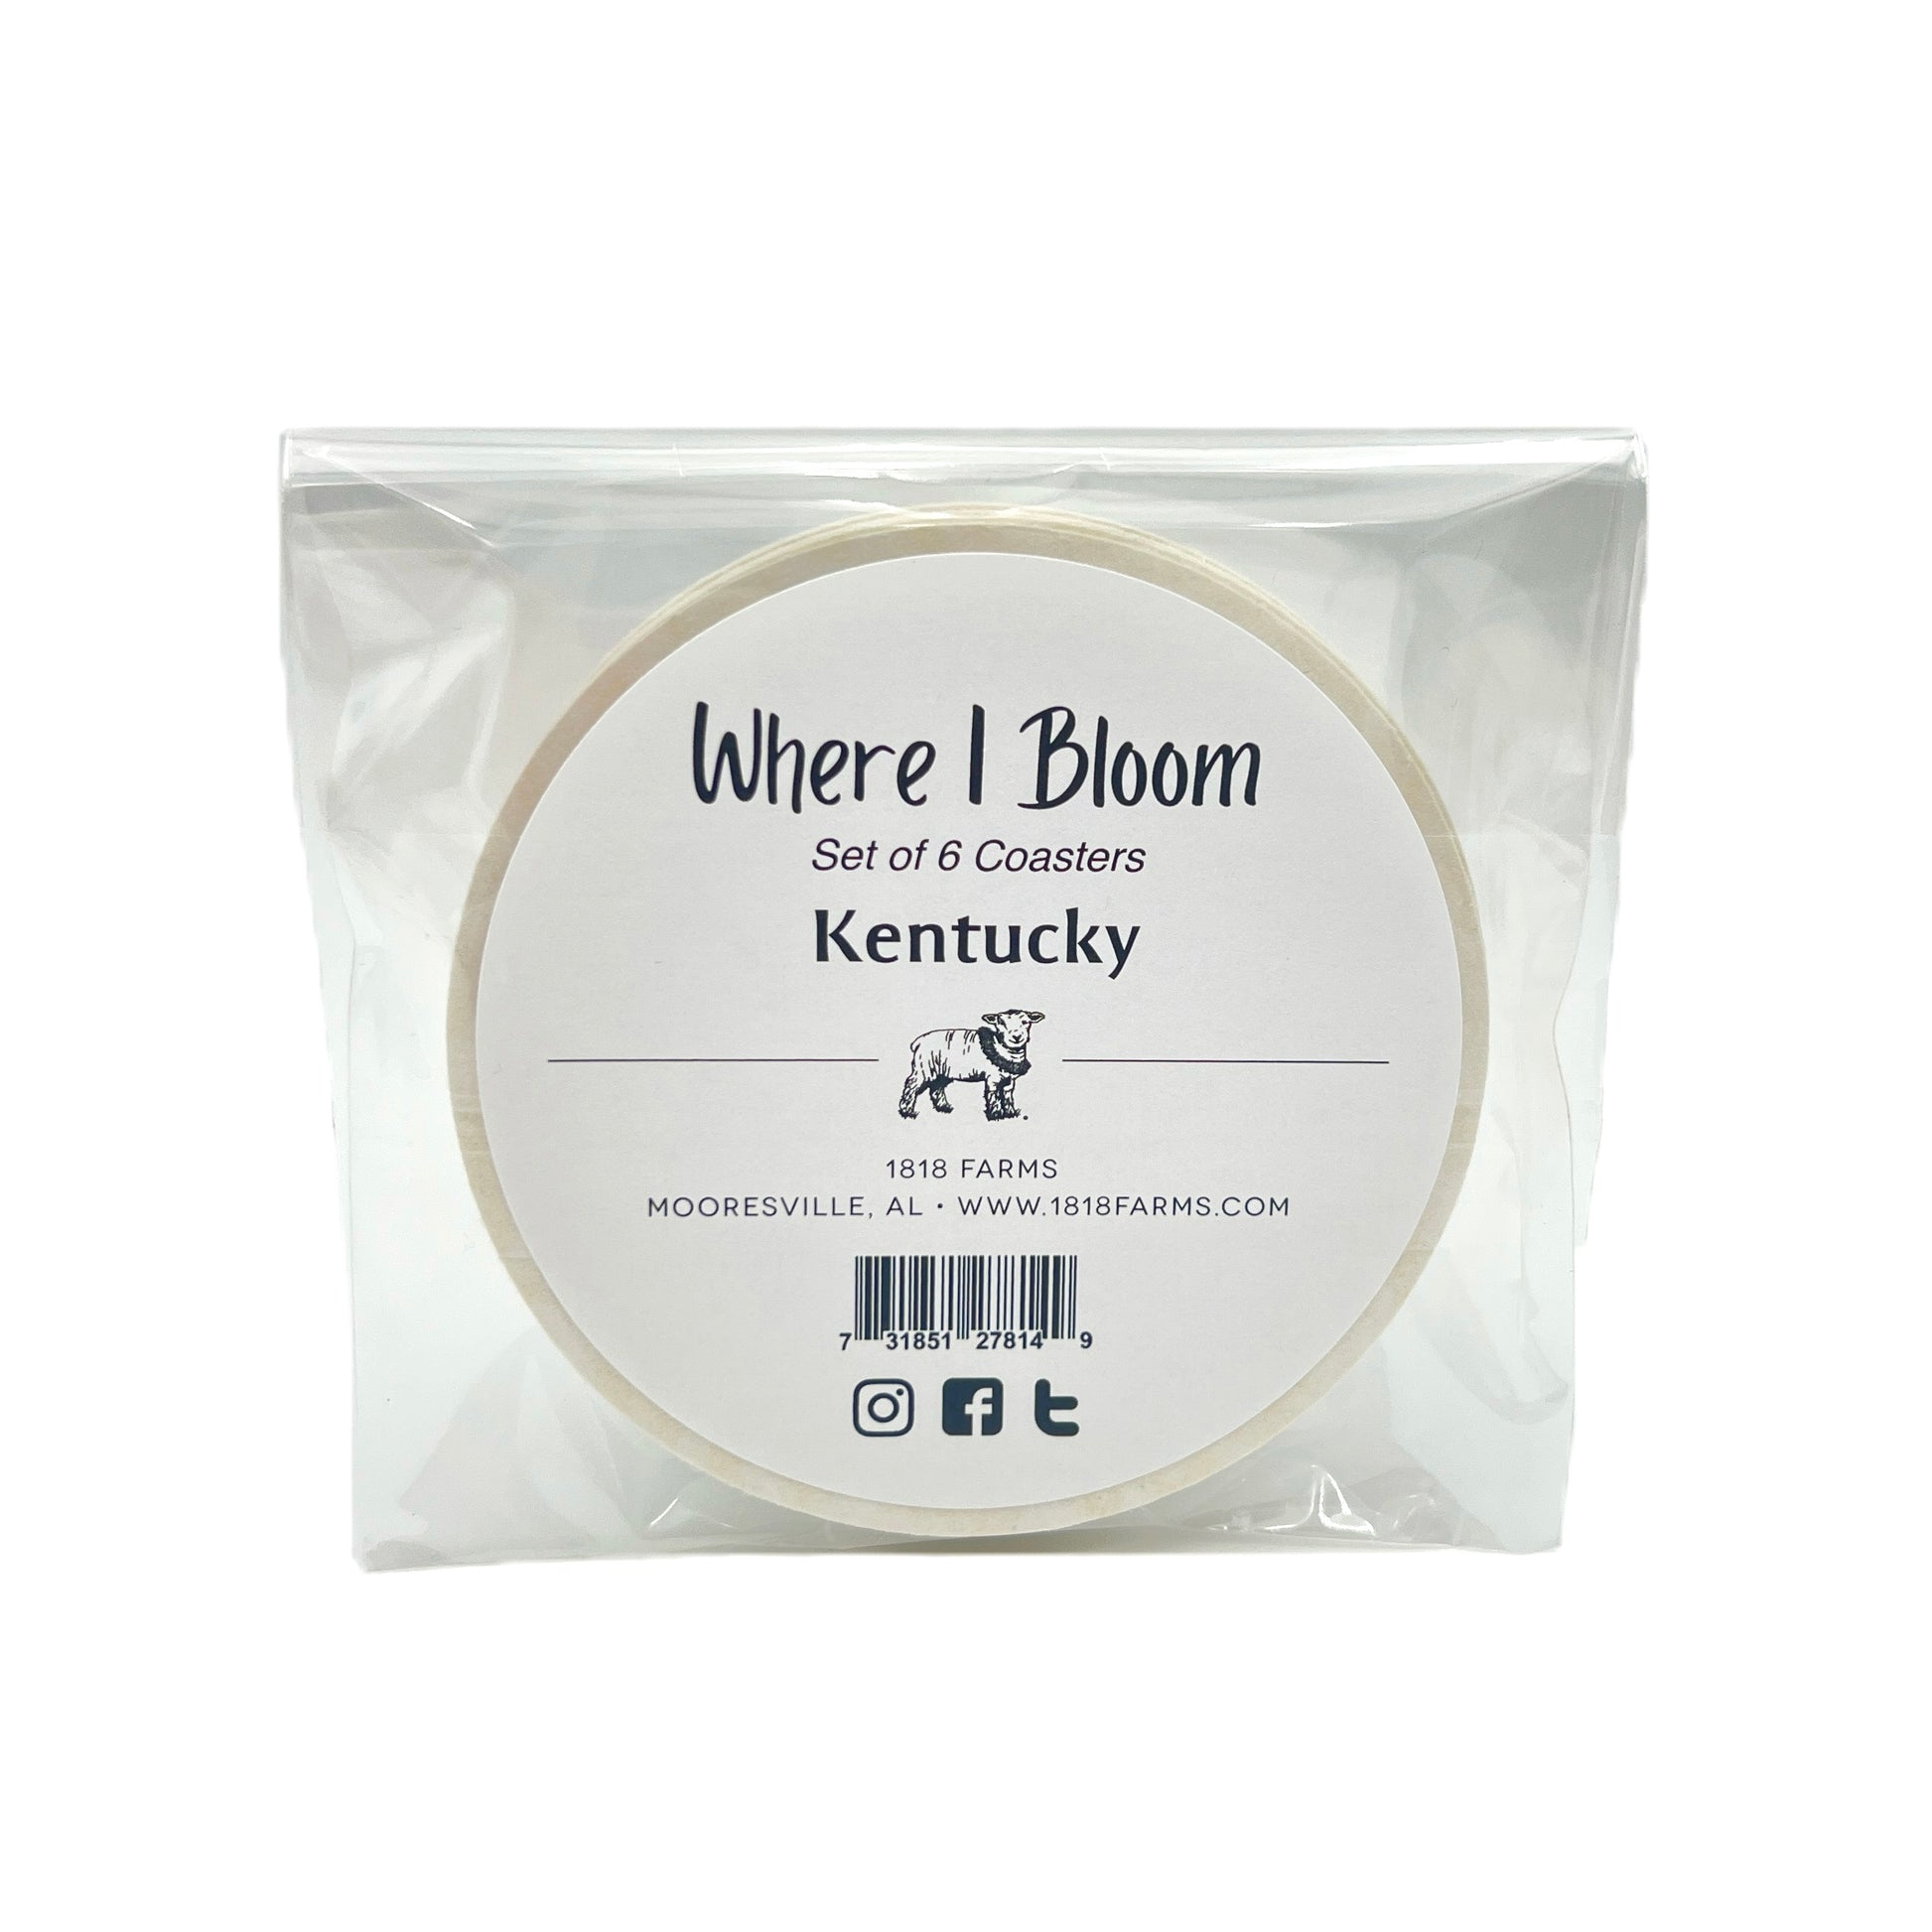 Kentucky Themed Coasters (Set of 6)  - "Where I Bloom" Collection Coaster 1818 Farms   